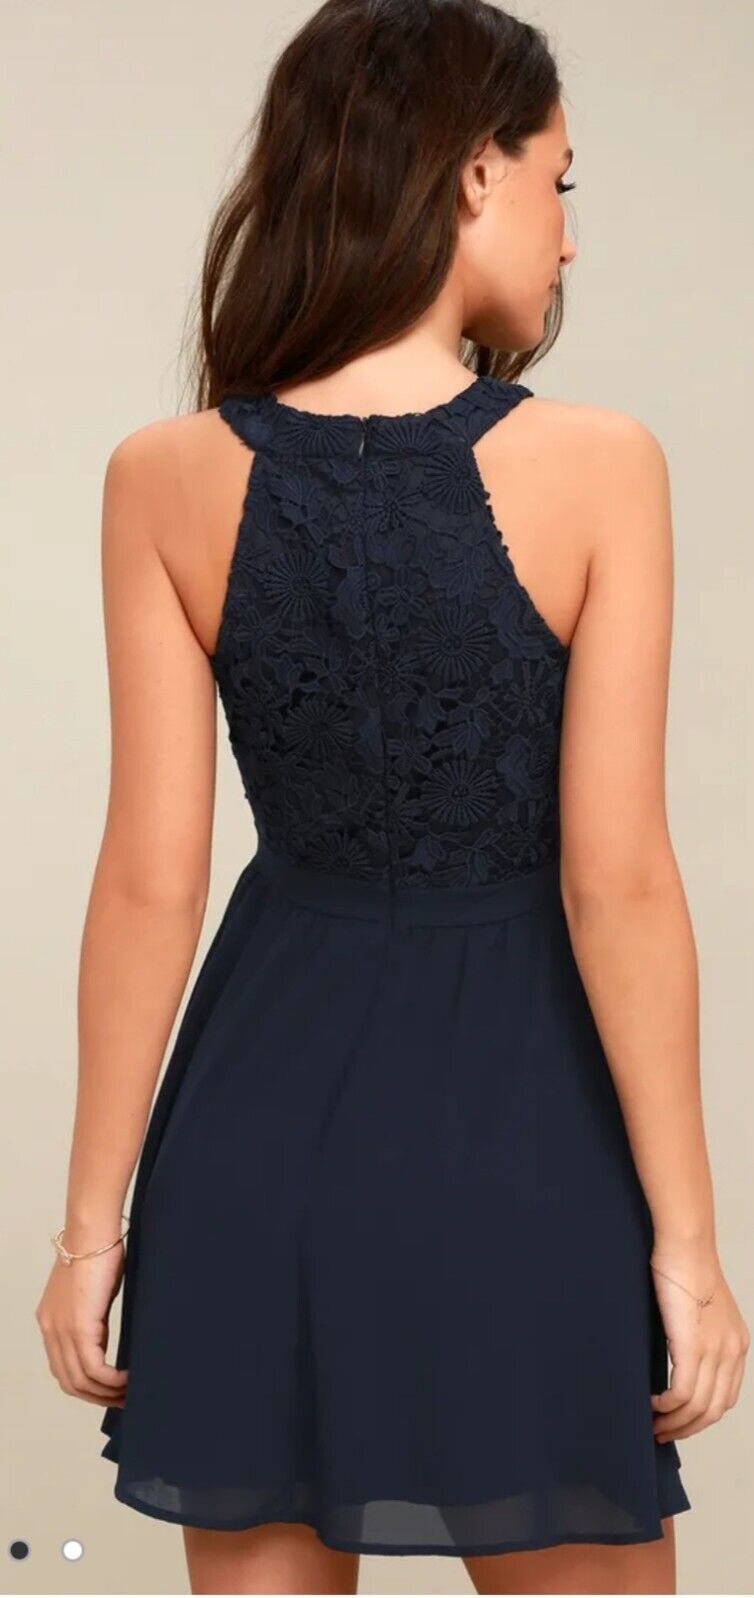 LULUS Lovers Game Navy Blue Lace Top Skater Dress Size MEDIUM